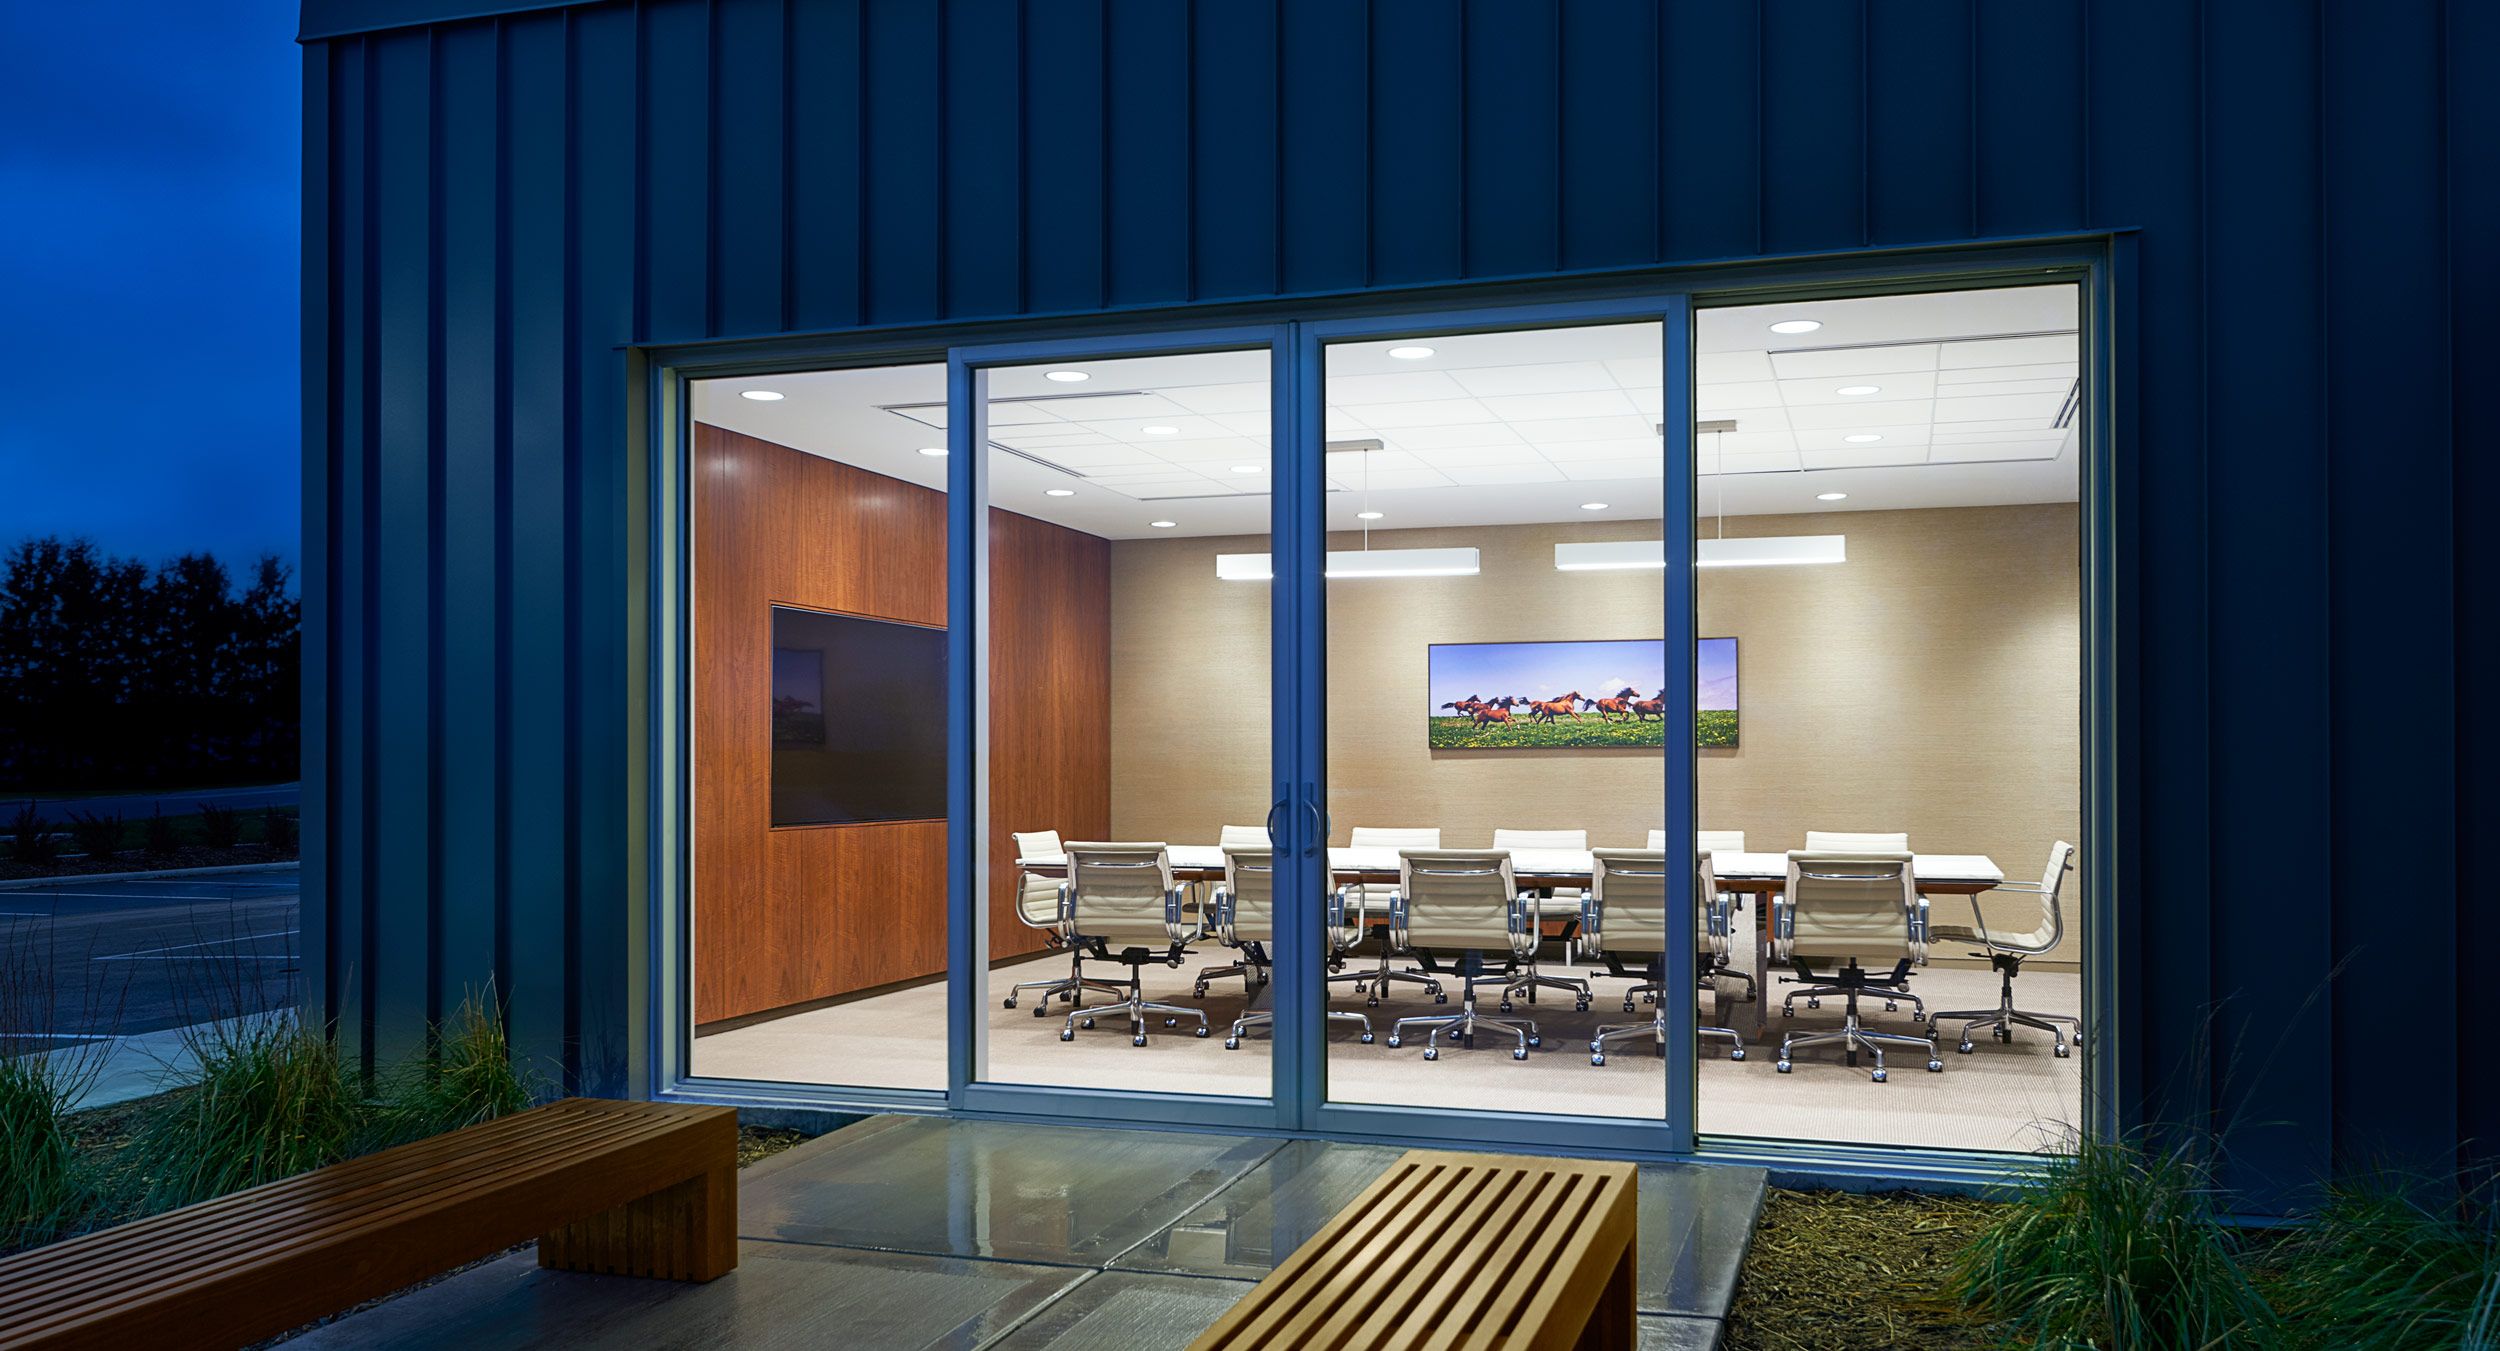 Our main conference room features a MESA table with a custom integrated media wall in Figured Walnut.